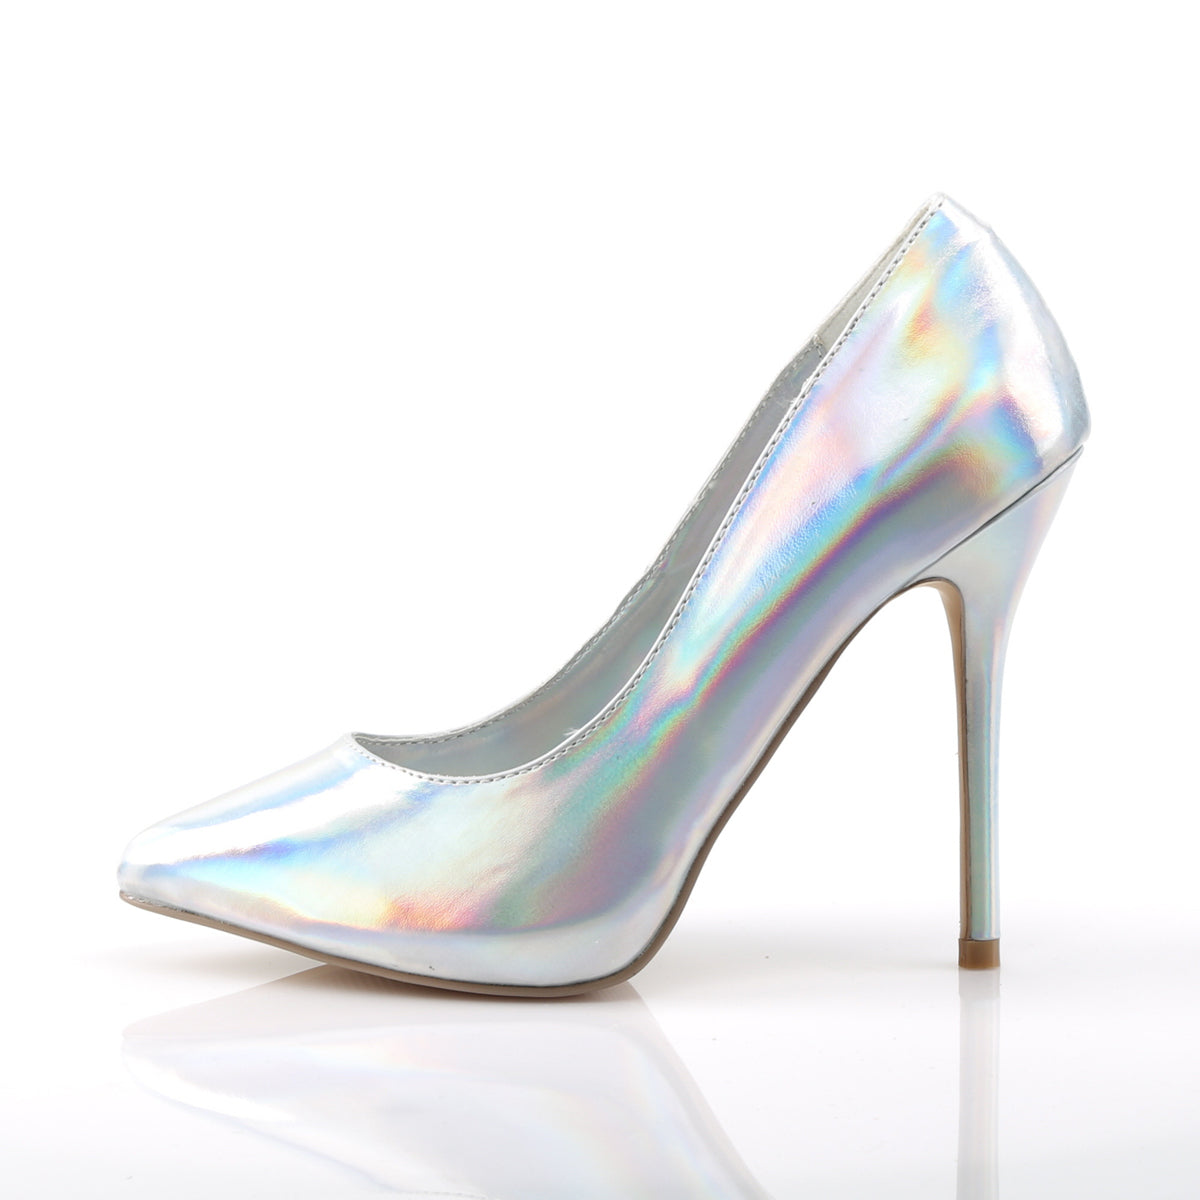 AMUSE-20 Pleaser Sexy 5" Heel Silver Hologram Fetish Shoes-Pleaser- Sexy Shoes Pole Dance Heels